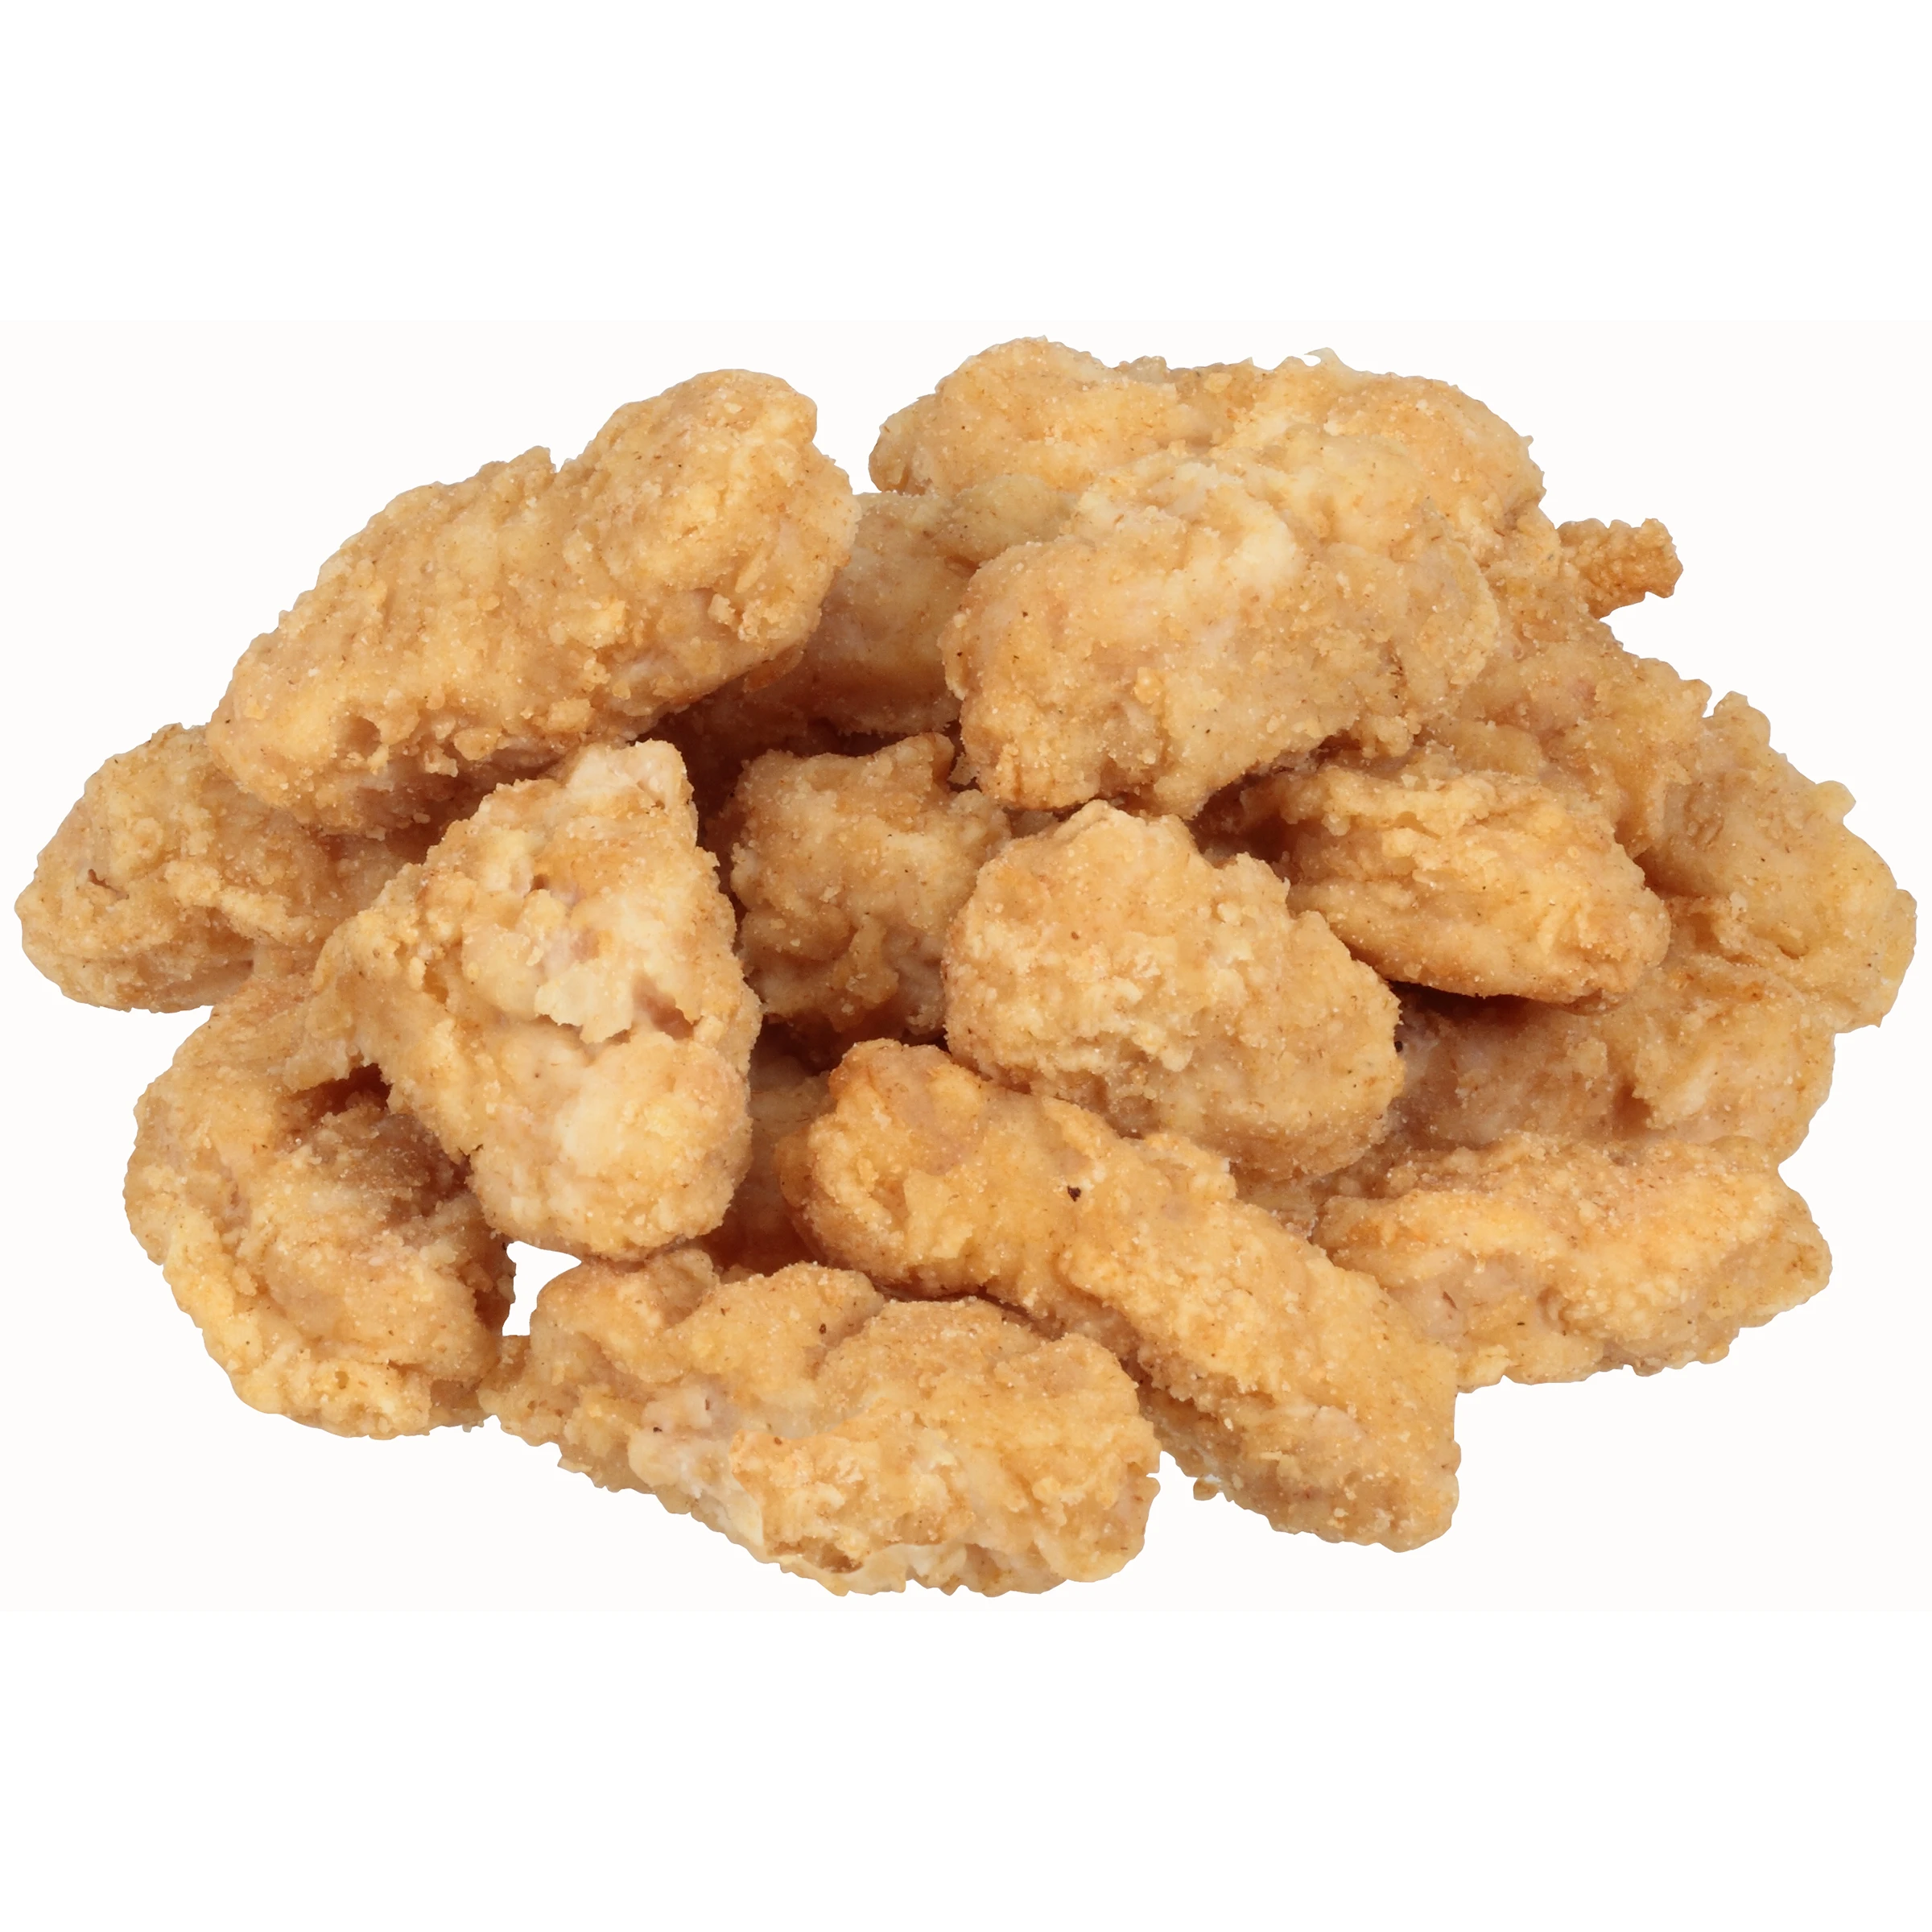 Tyson® NAE, Fully Cooked, Breaded Dark Chicken Chunks 3 oz.http://images.salsify.com/image/upload/s--5bWhmdOy--/u91ugfhh8nte1ufoxwg3.webp